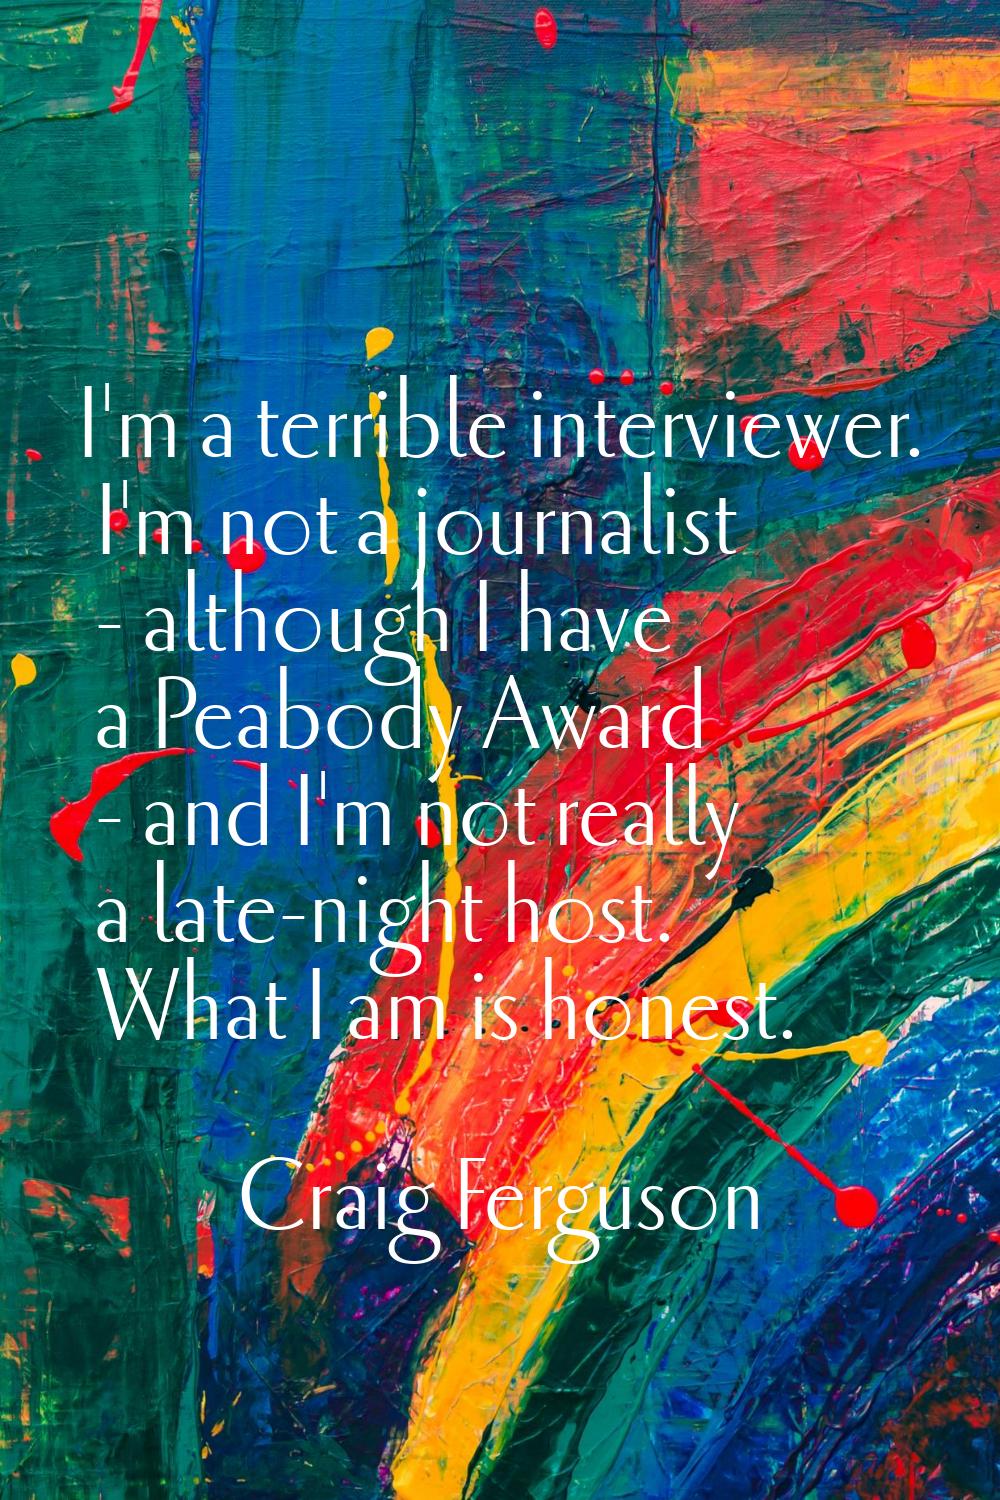 I'm a terrible interviewer. I'm not a journalist - although I have a Peabody Award - and I'm not re